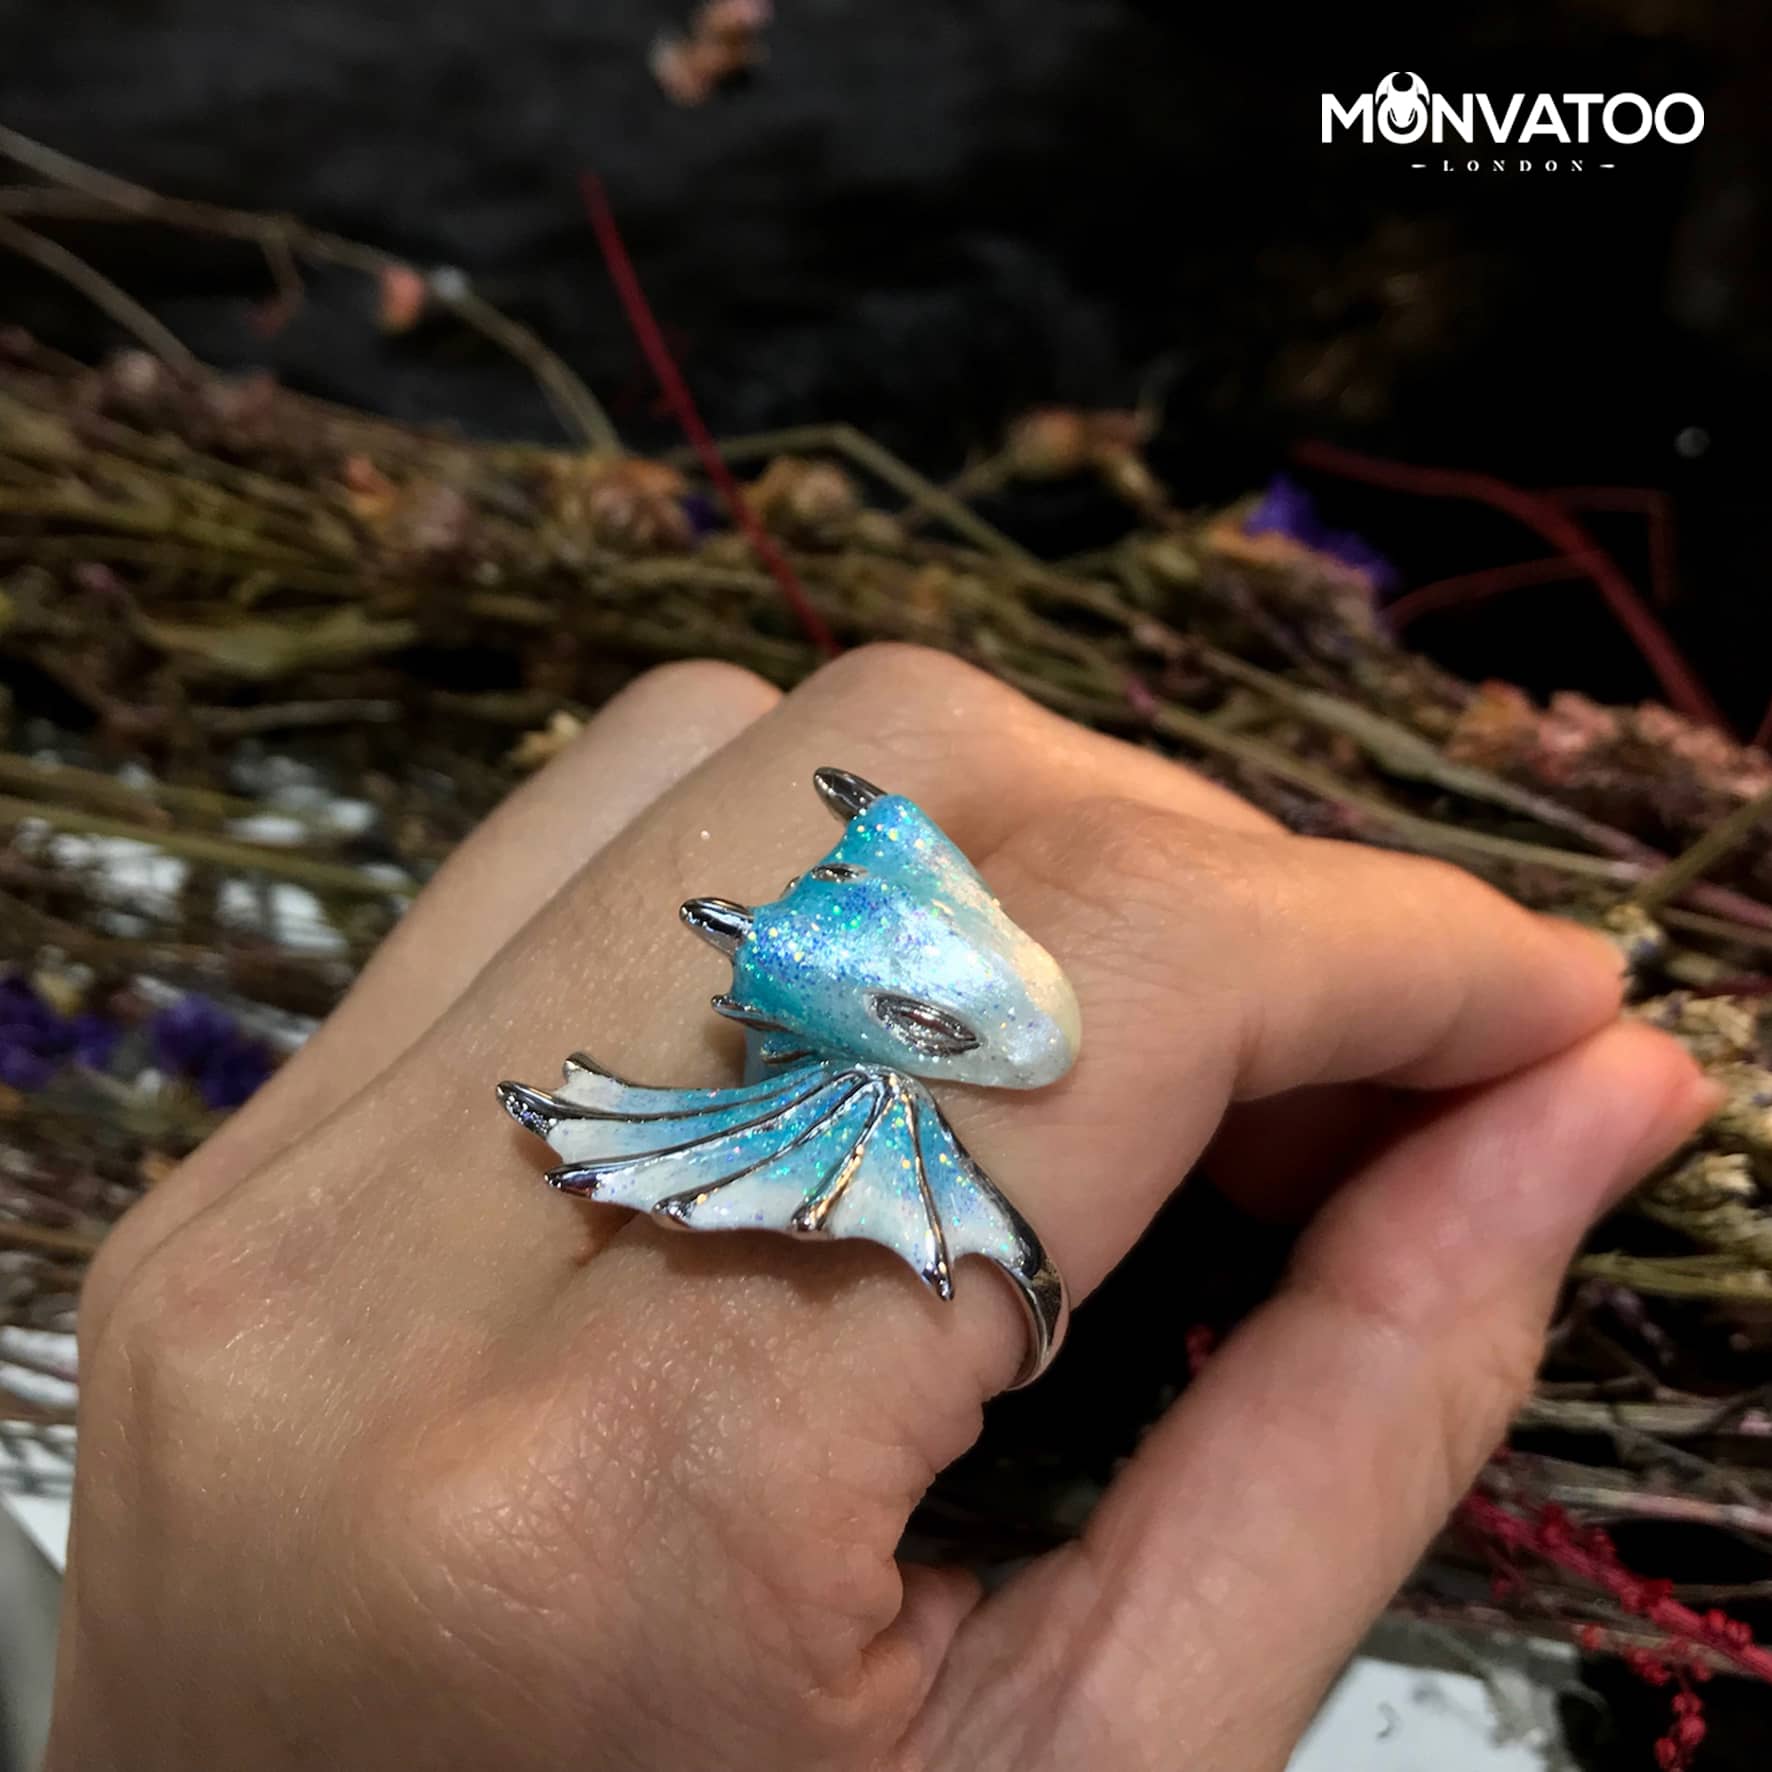 Silver turquoise dragon ring by MONVATOO London in a side view perfect for fantasy lover